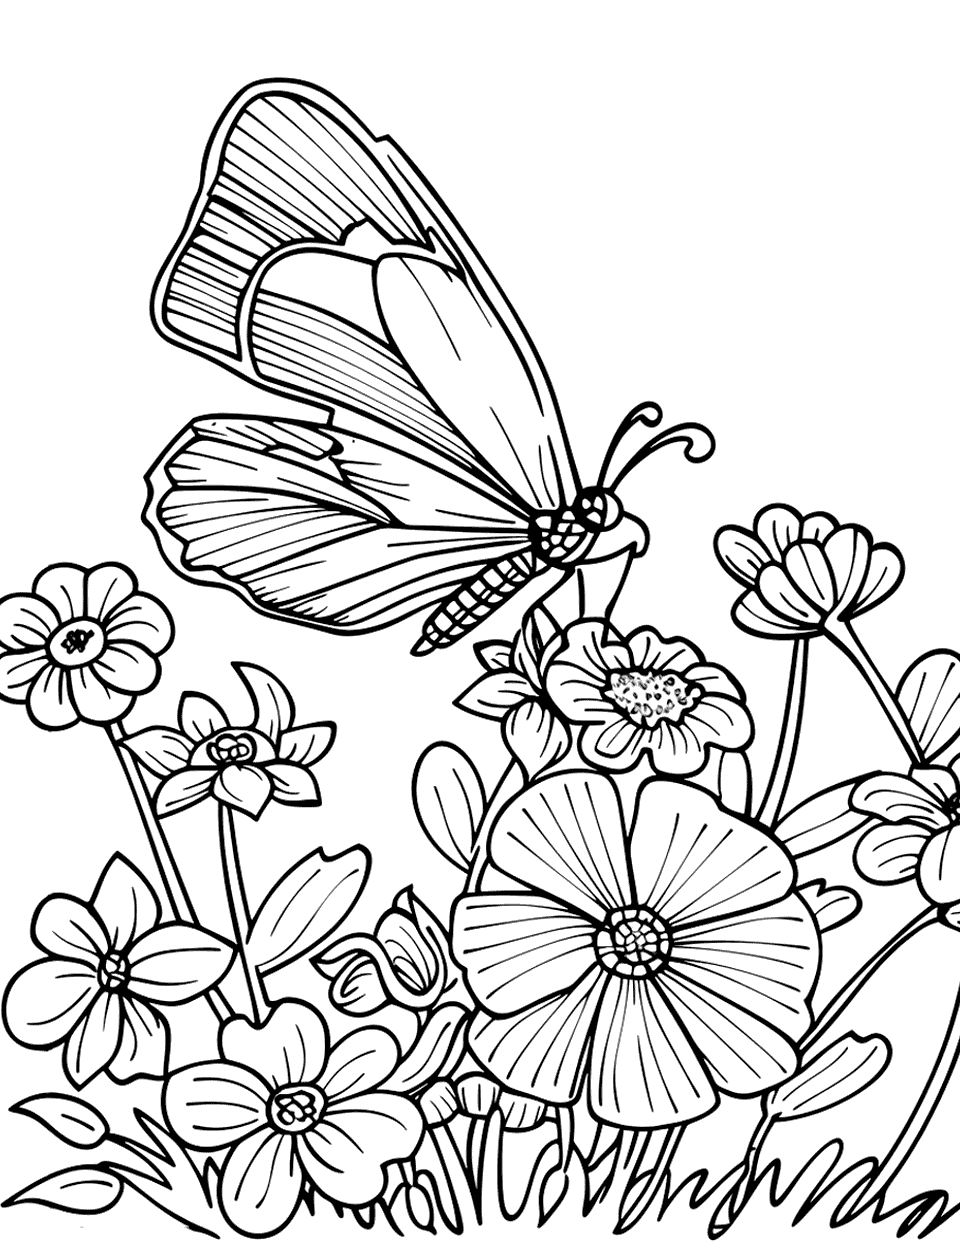 Butterfly Visiting Flowers Garden Coloring Page - A butterfly with large wings fluttering around a butterfly garden.